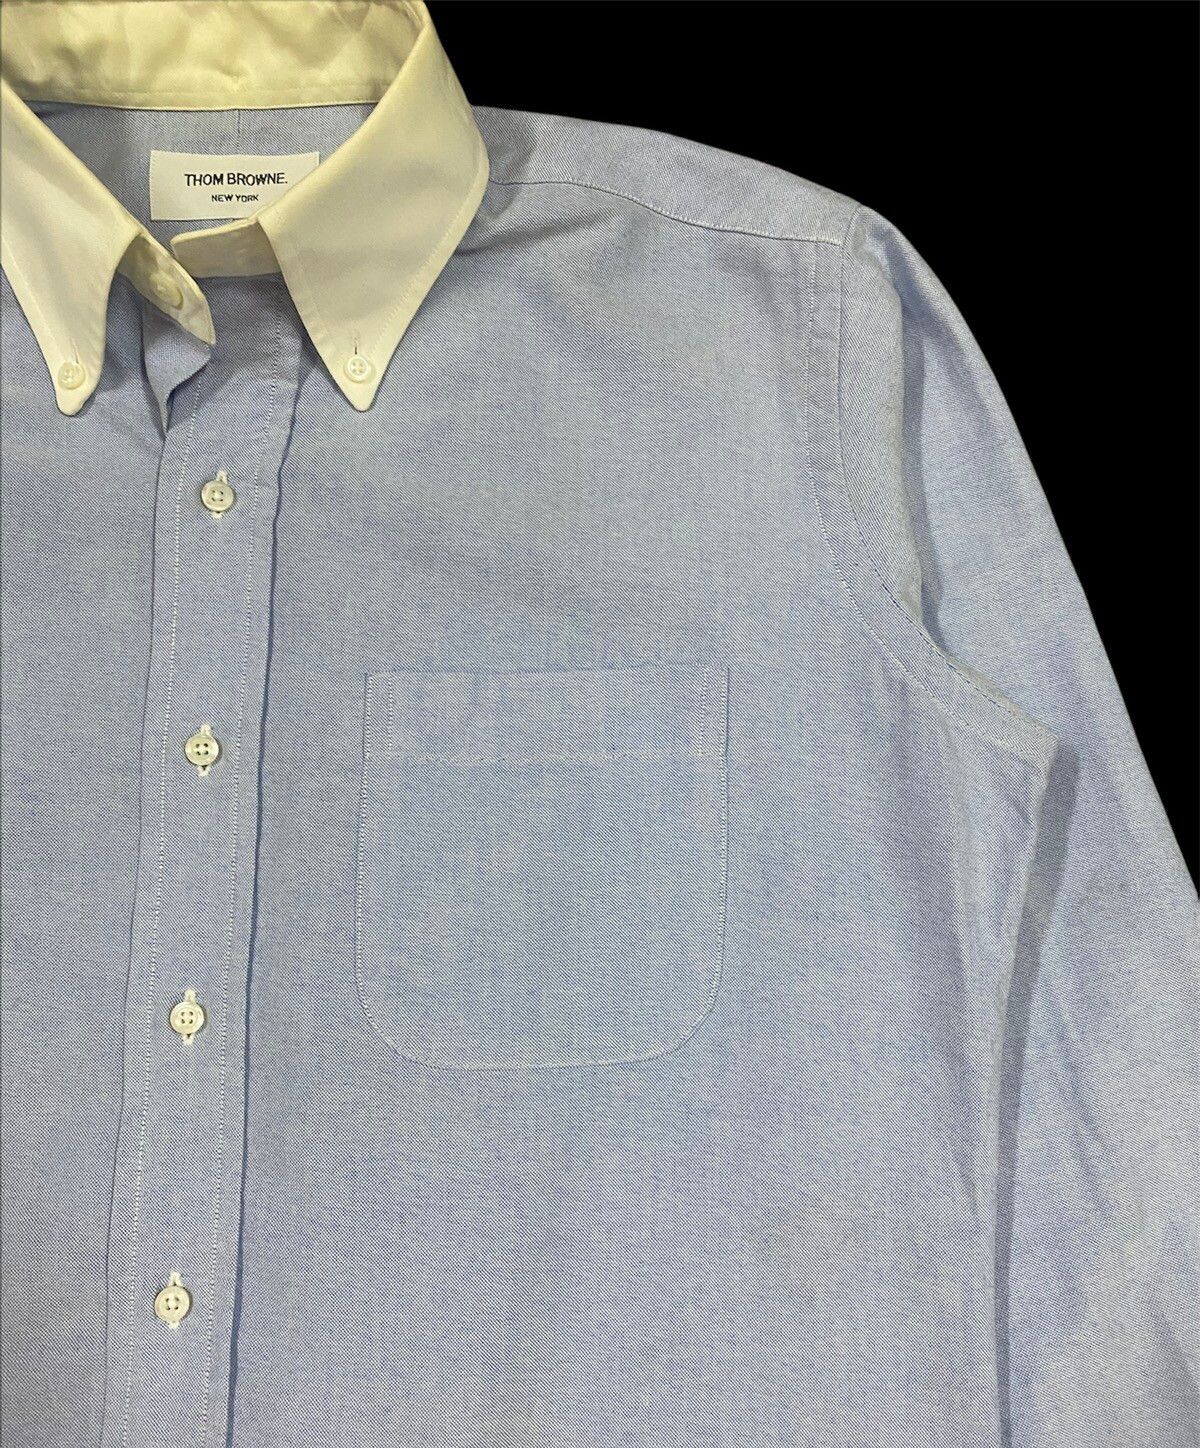 Authentic🔥Thom Browne Blue Oxford Button Down Shirt Size 3 - 10